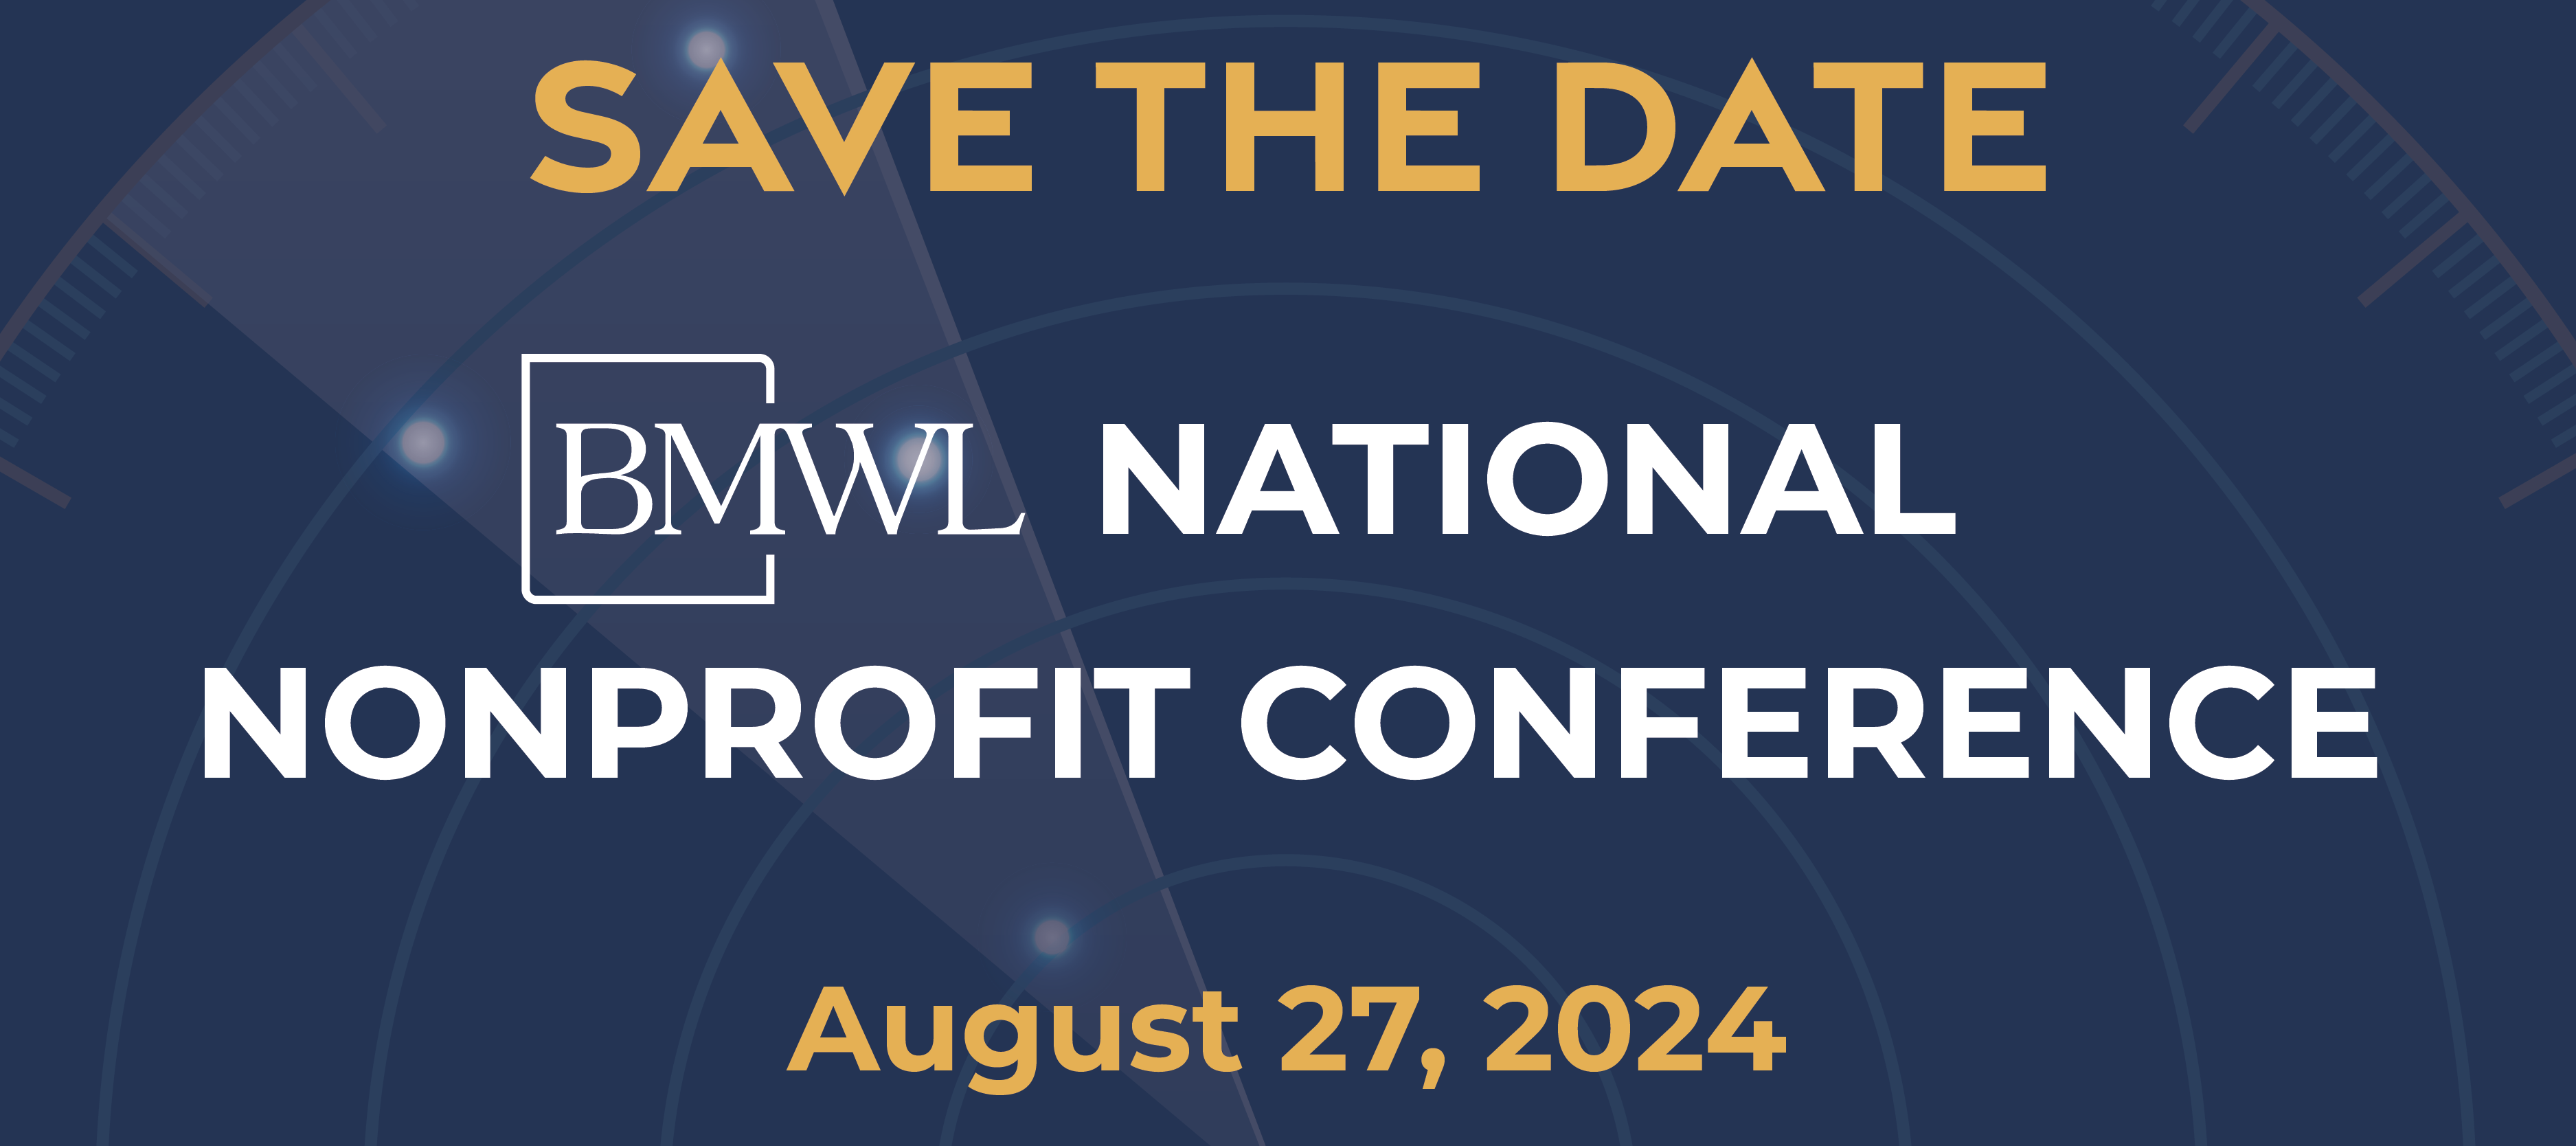 Save the Date! BMWL National Nonprofit Conference - 2024